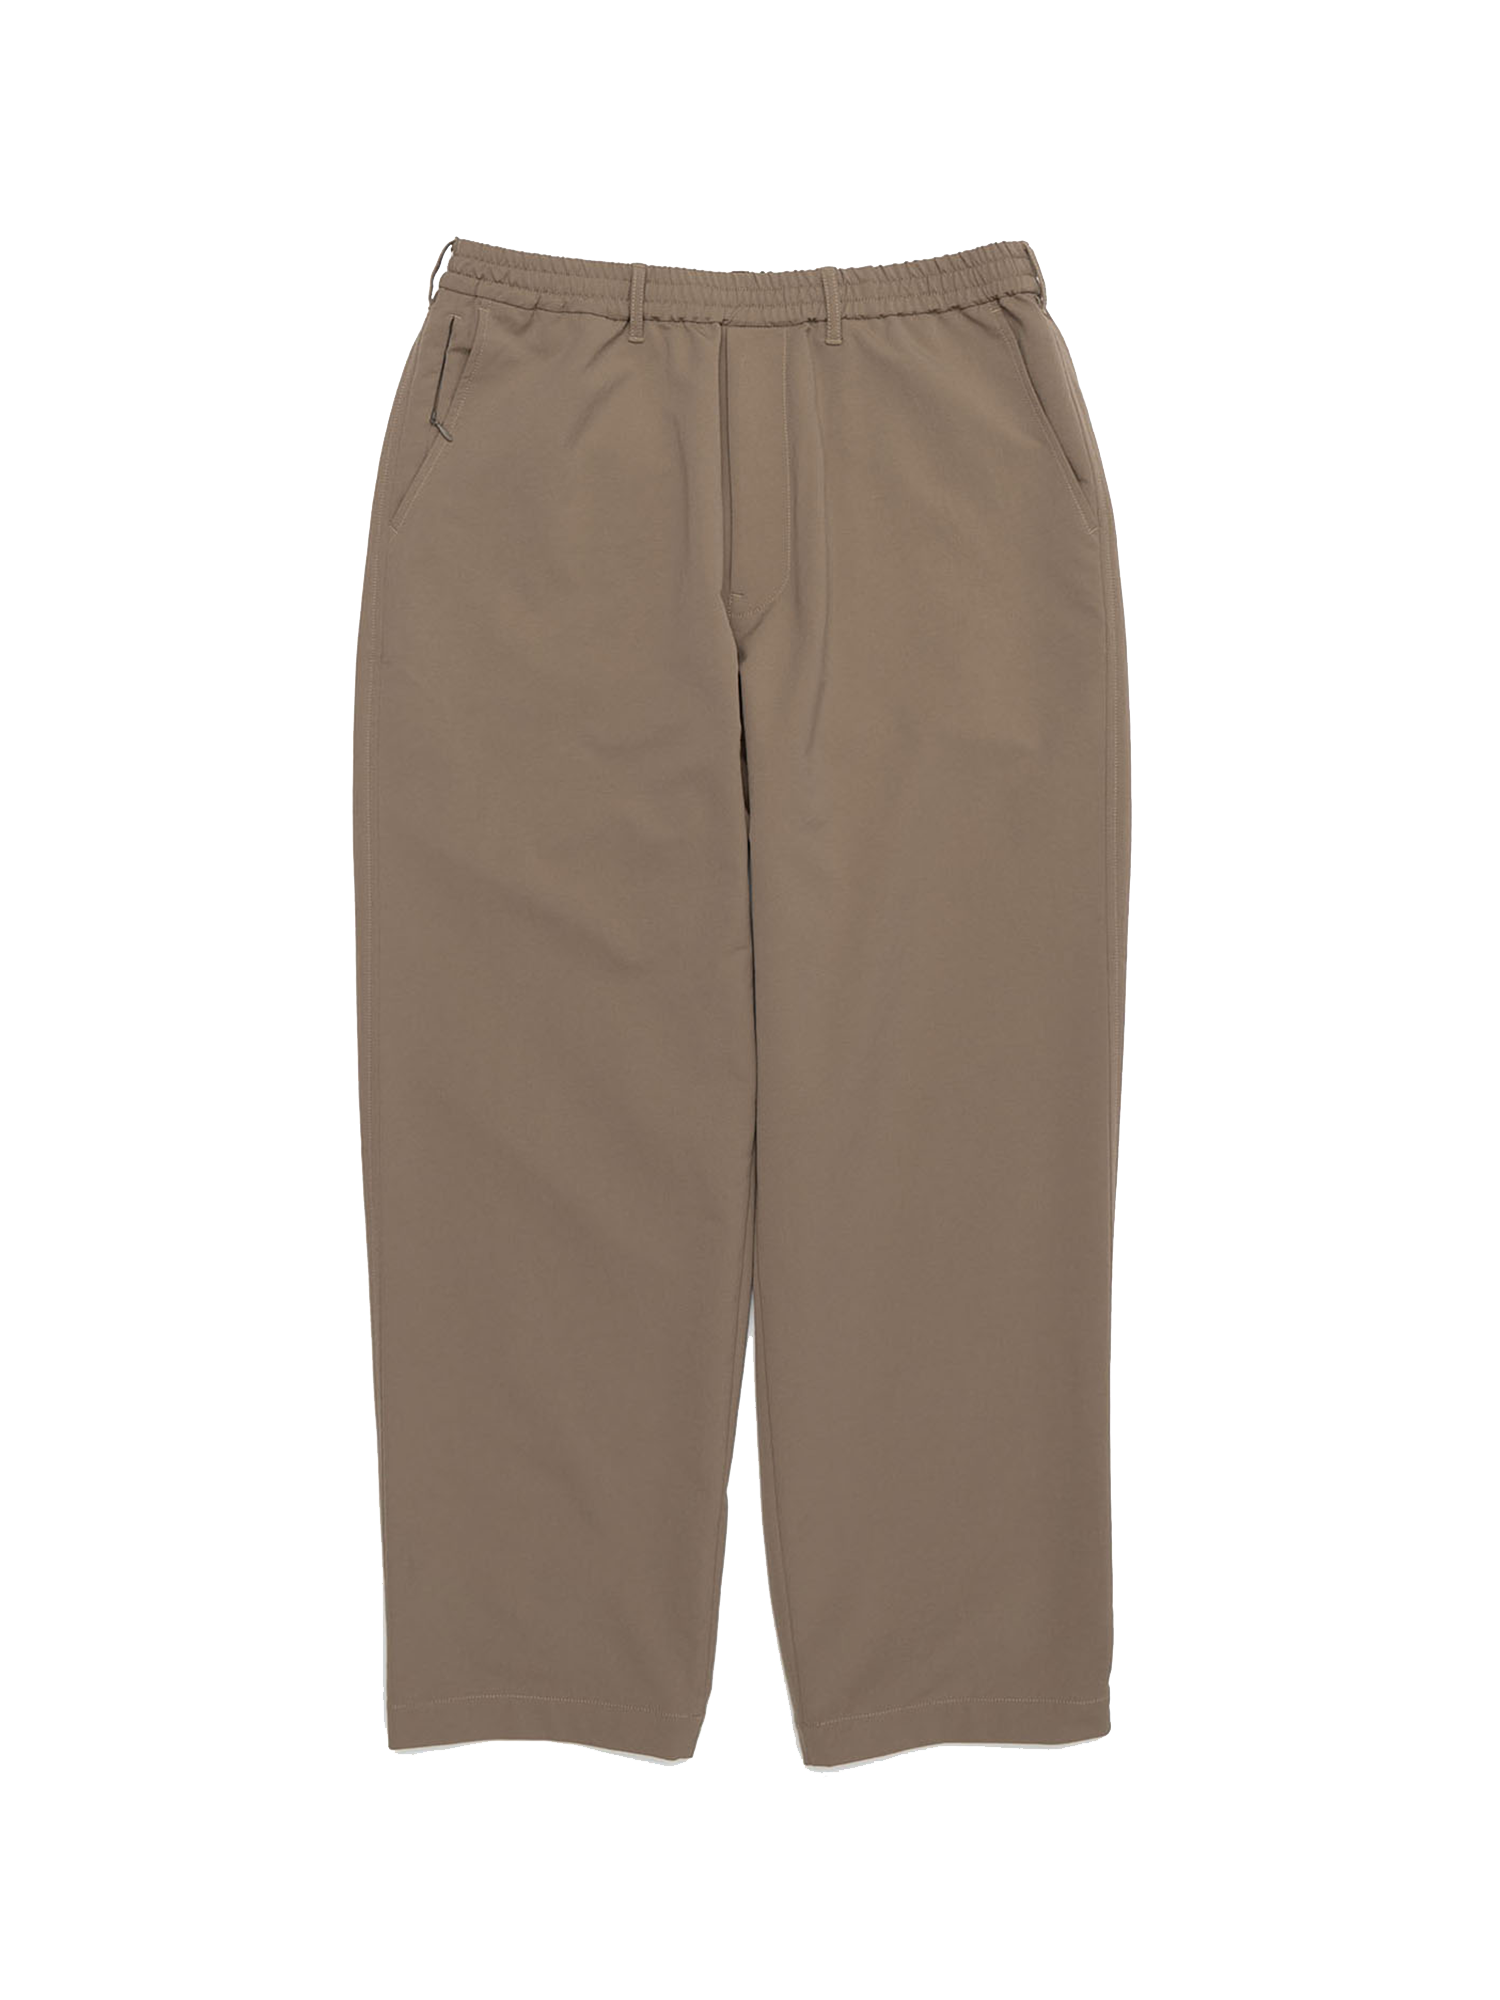 nanamica - Pant - Alphadry® - Wide Easy Pant - Taupe